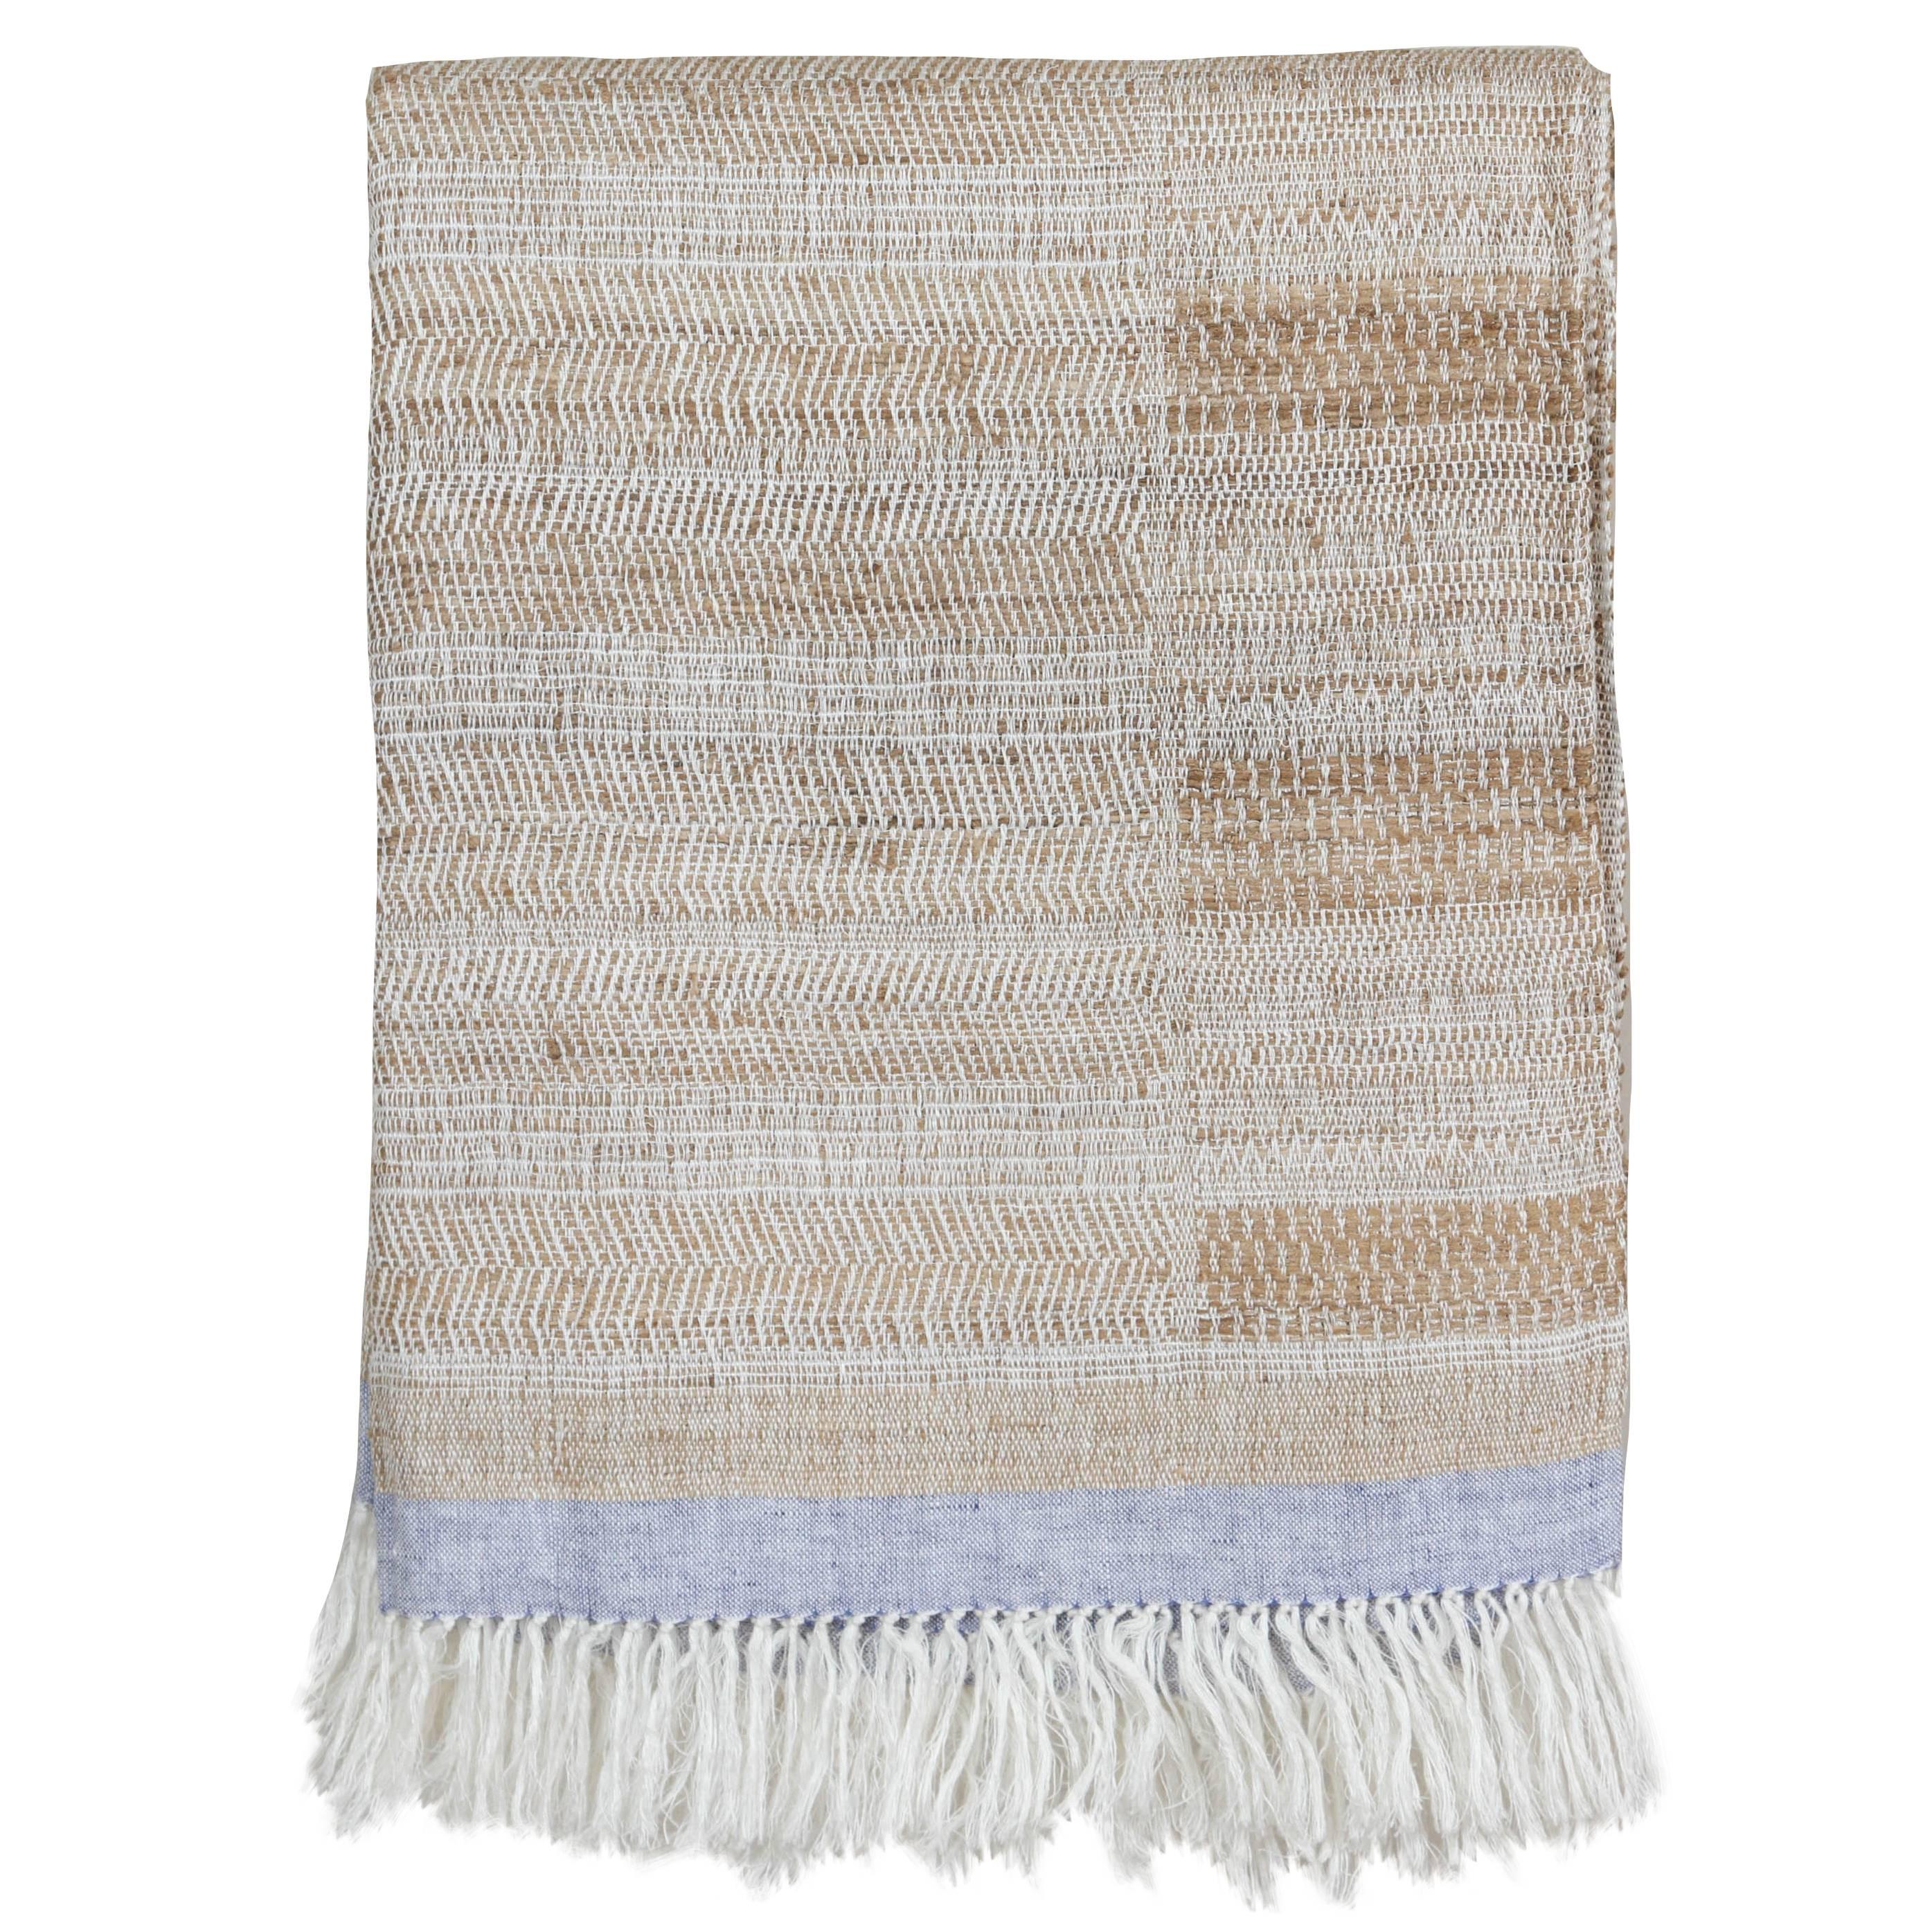 Indian Handwoven Throw Oatmeal, Ivory and Light Blue, Linen and Raw Silk For Sale